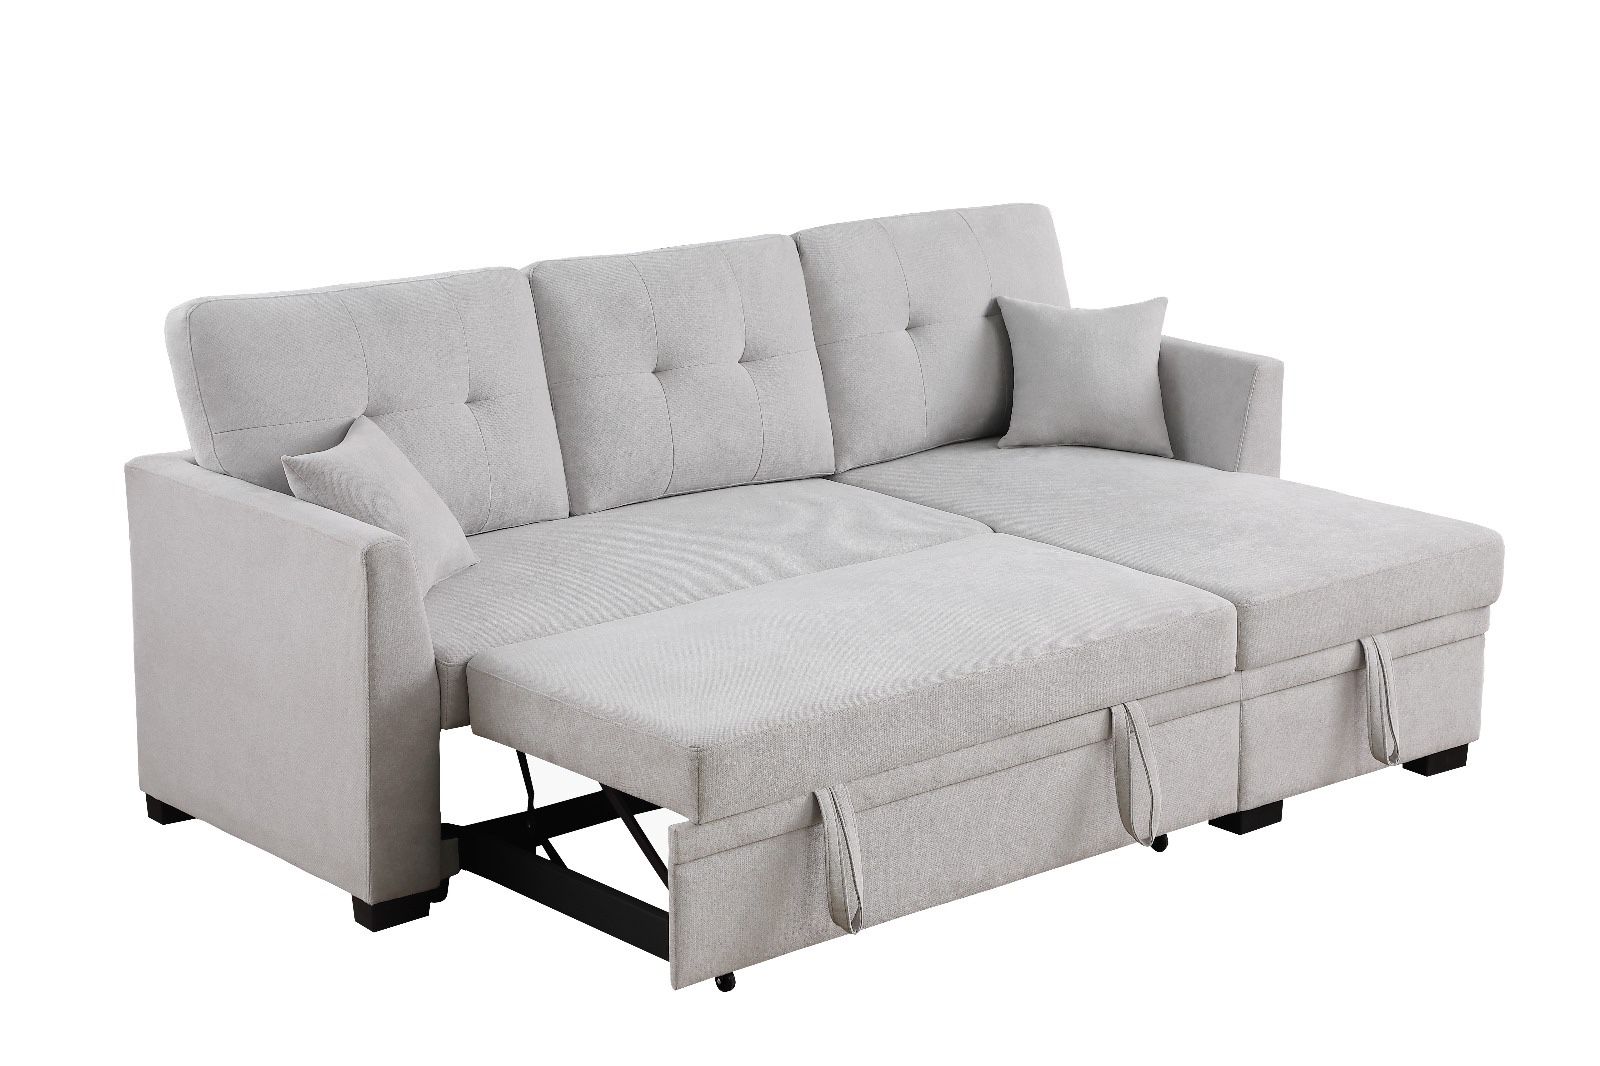 New! Reversible Sectional Sofa Bed, Sleeper Sofa, Sofa Bed, Sectional Sofa Bed, Pull Out Bed Sofa, Convertible Sofa, Couch